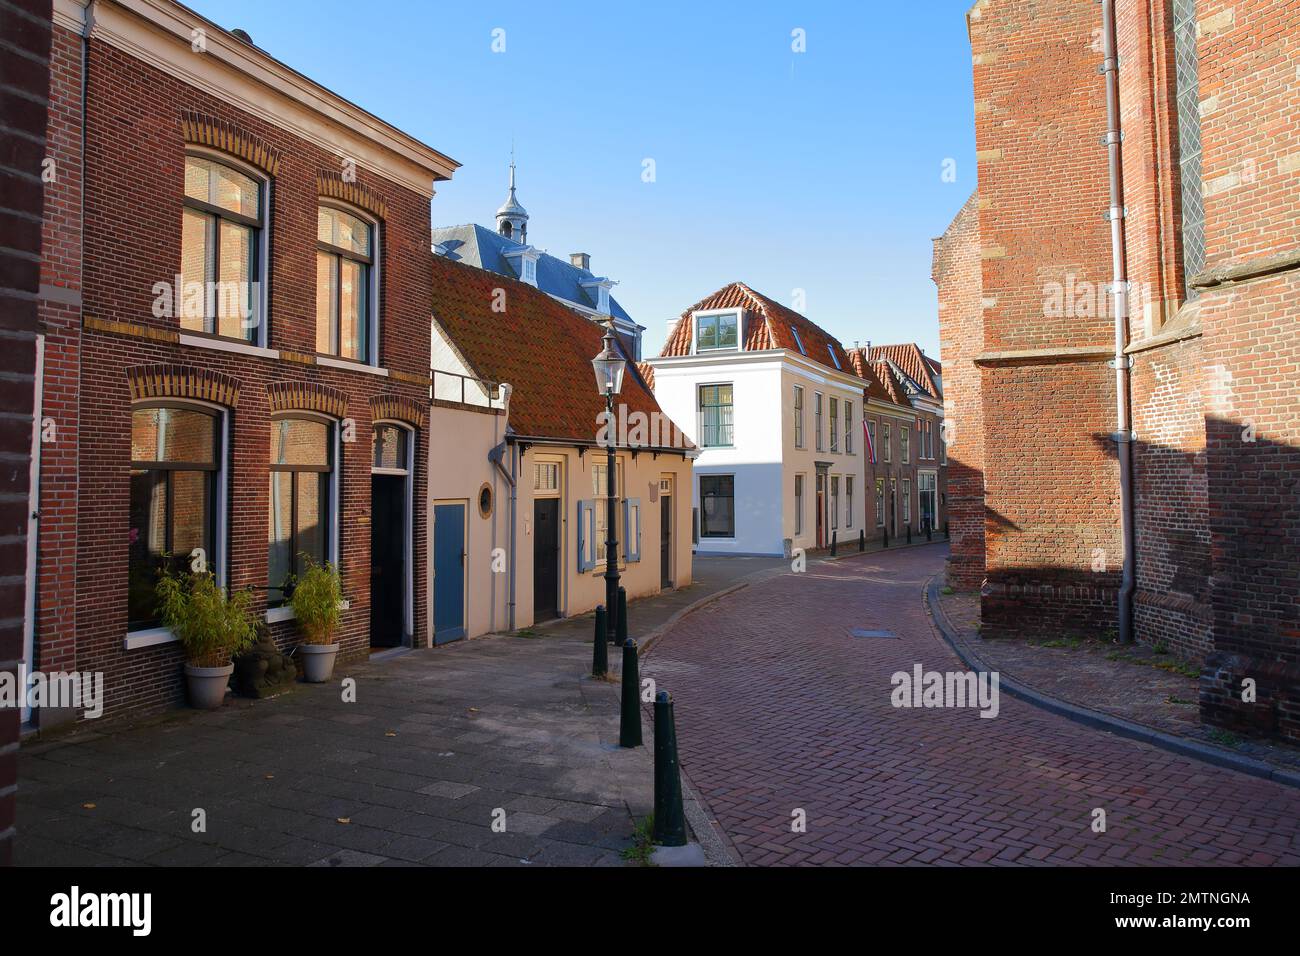 The historic city center of Weesp, a small town located in the East of Amsterdam, North Holland, Netherlands, with historic houses along Kerkstraat Stock Photo